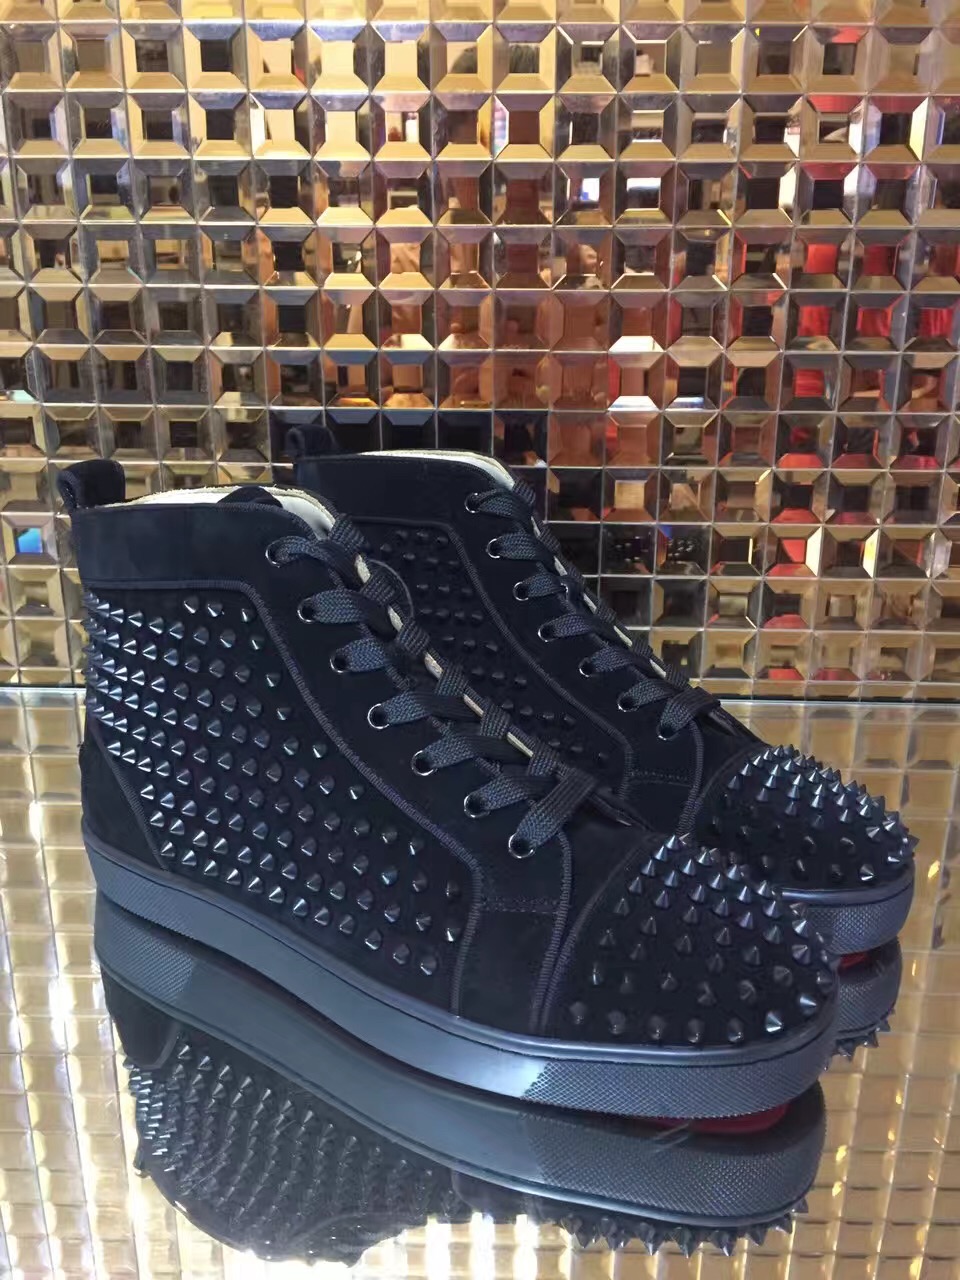 louboutin high top spikes